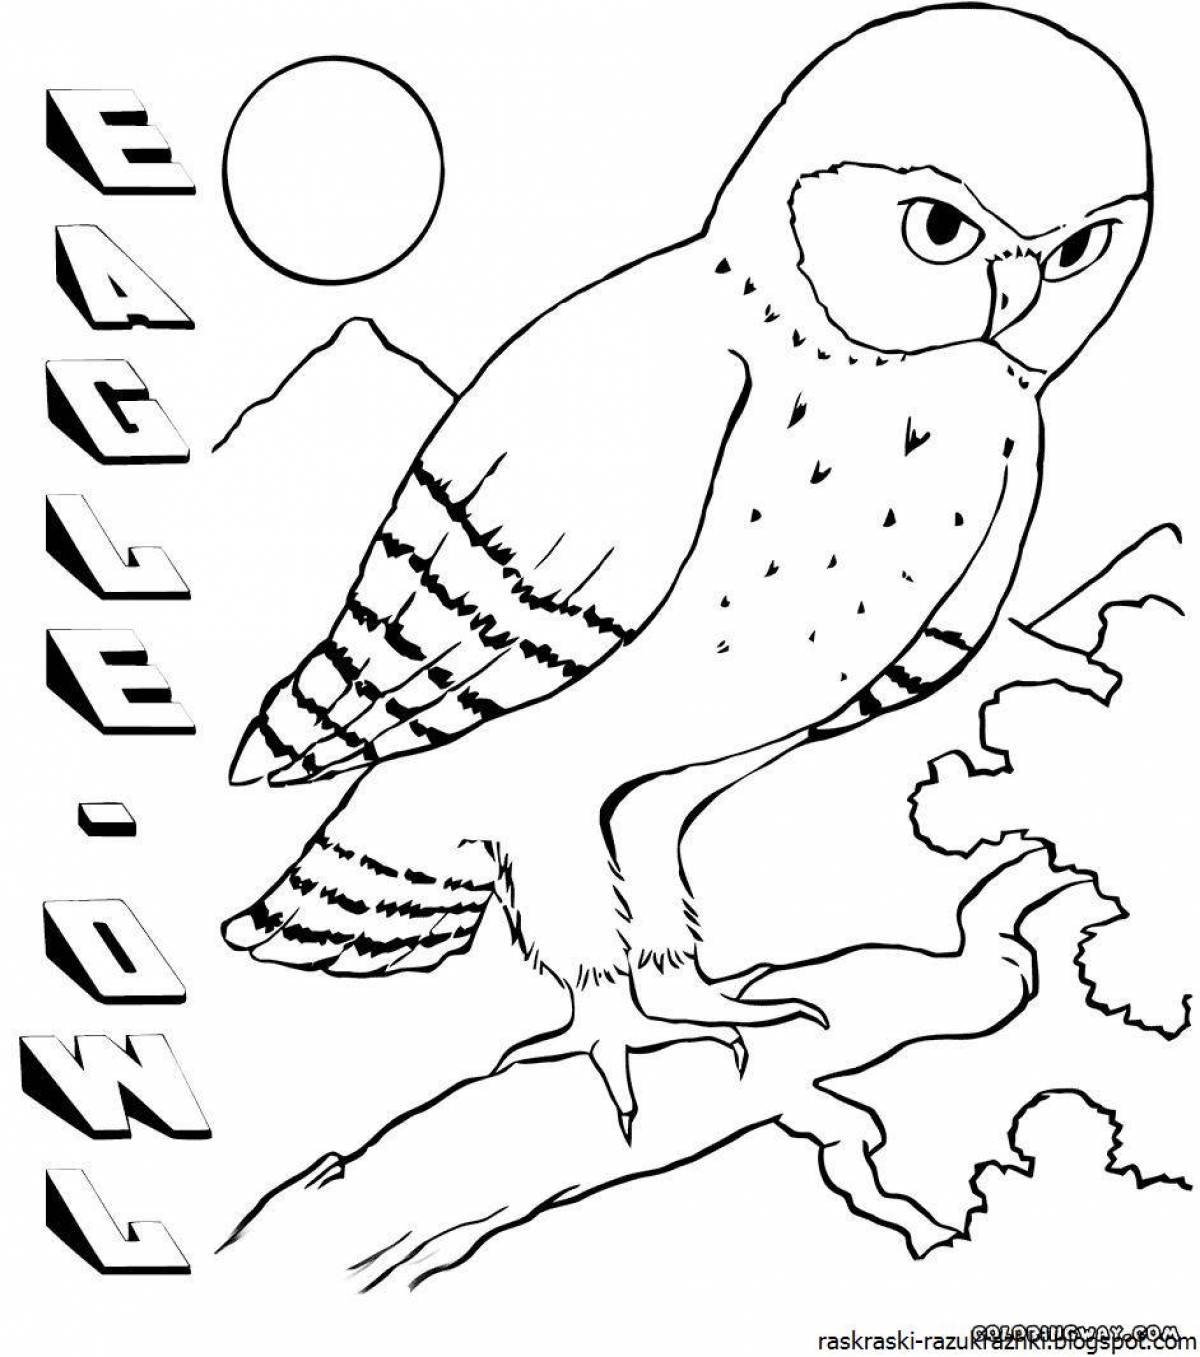 Coloring pages dazzling wintering birds for kids